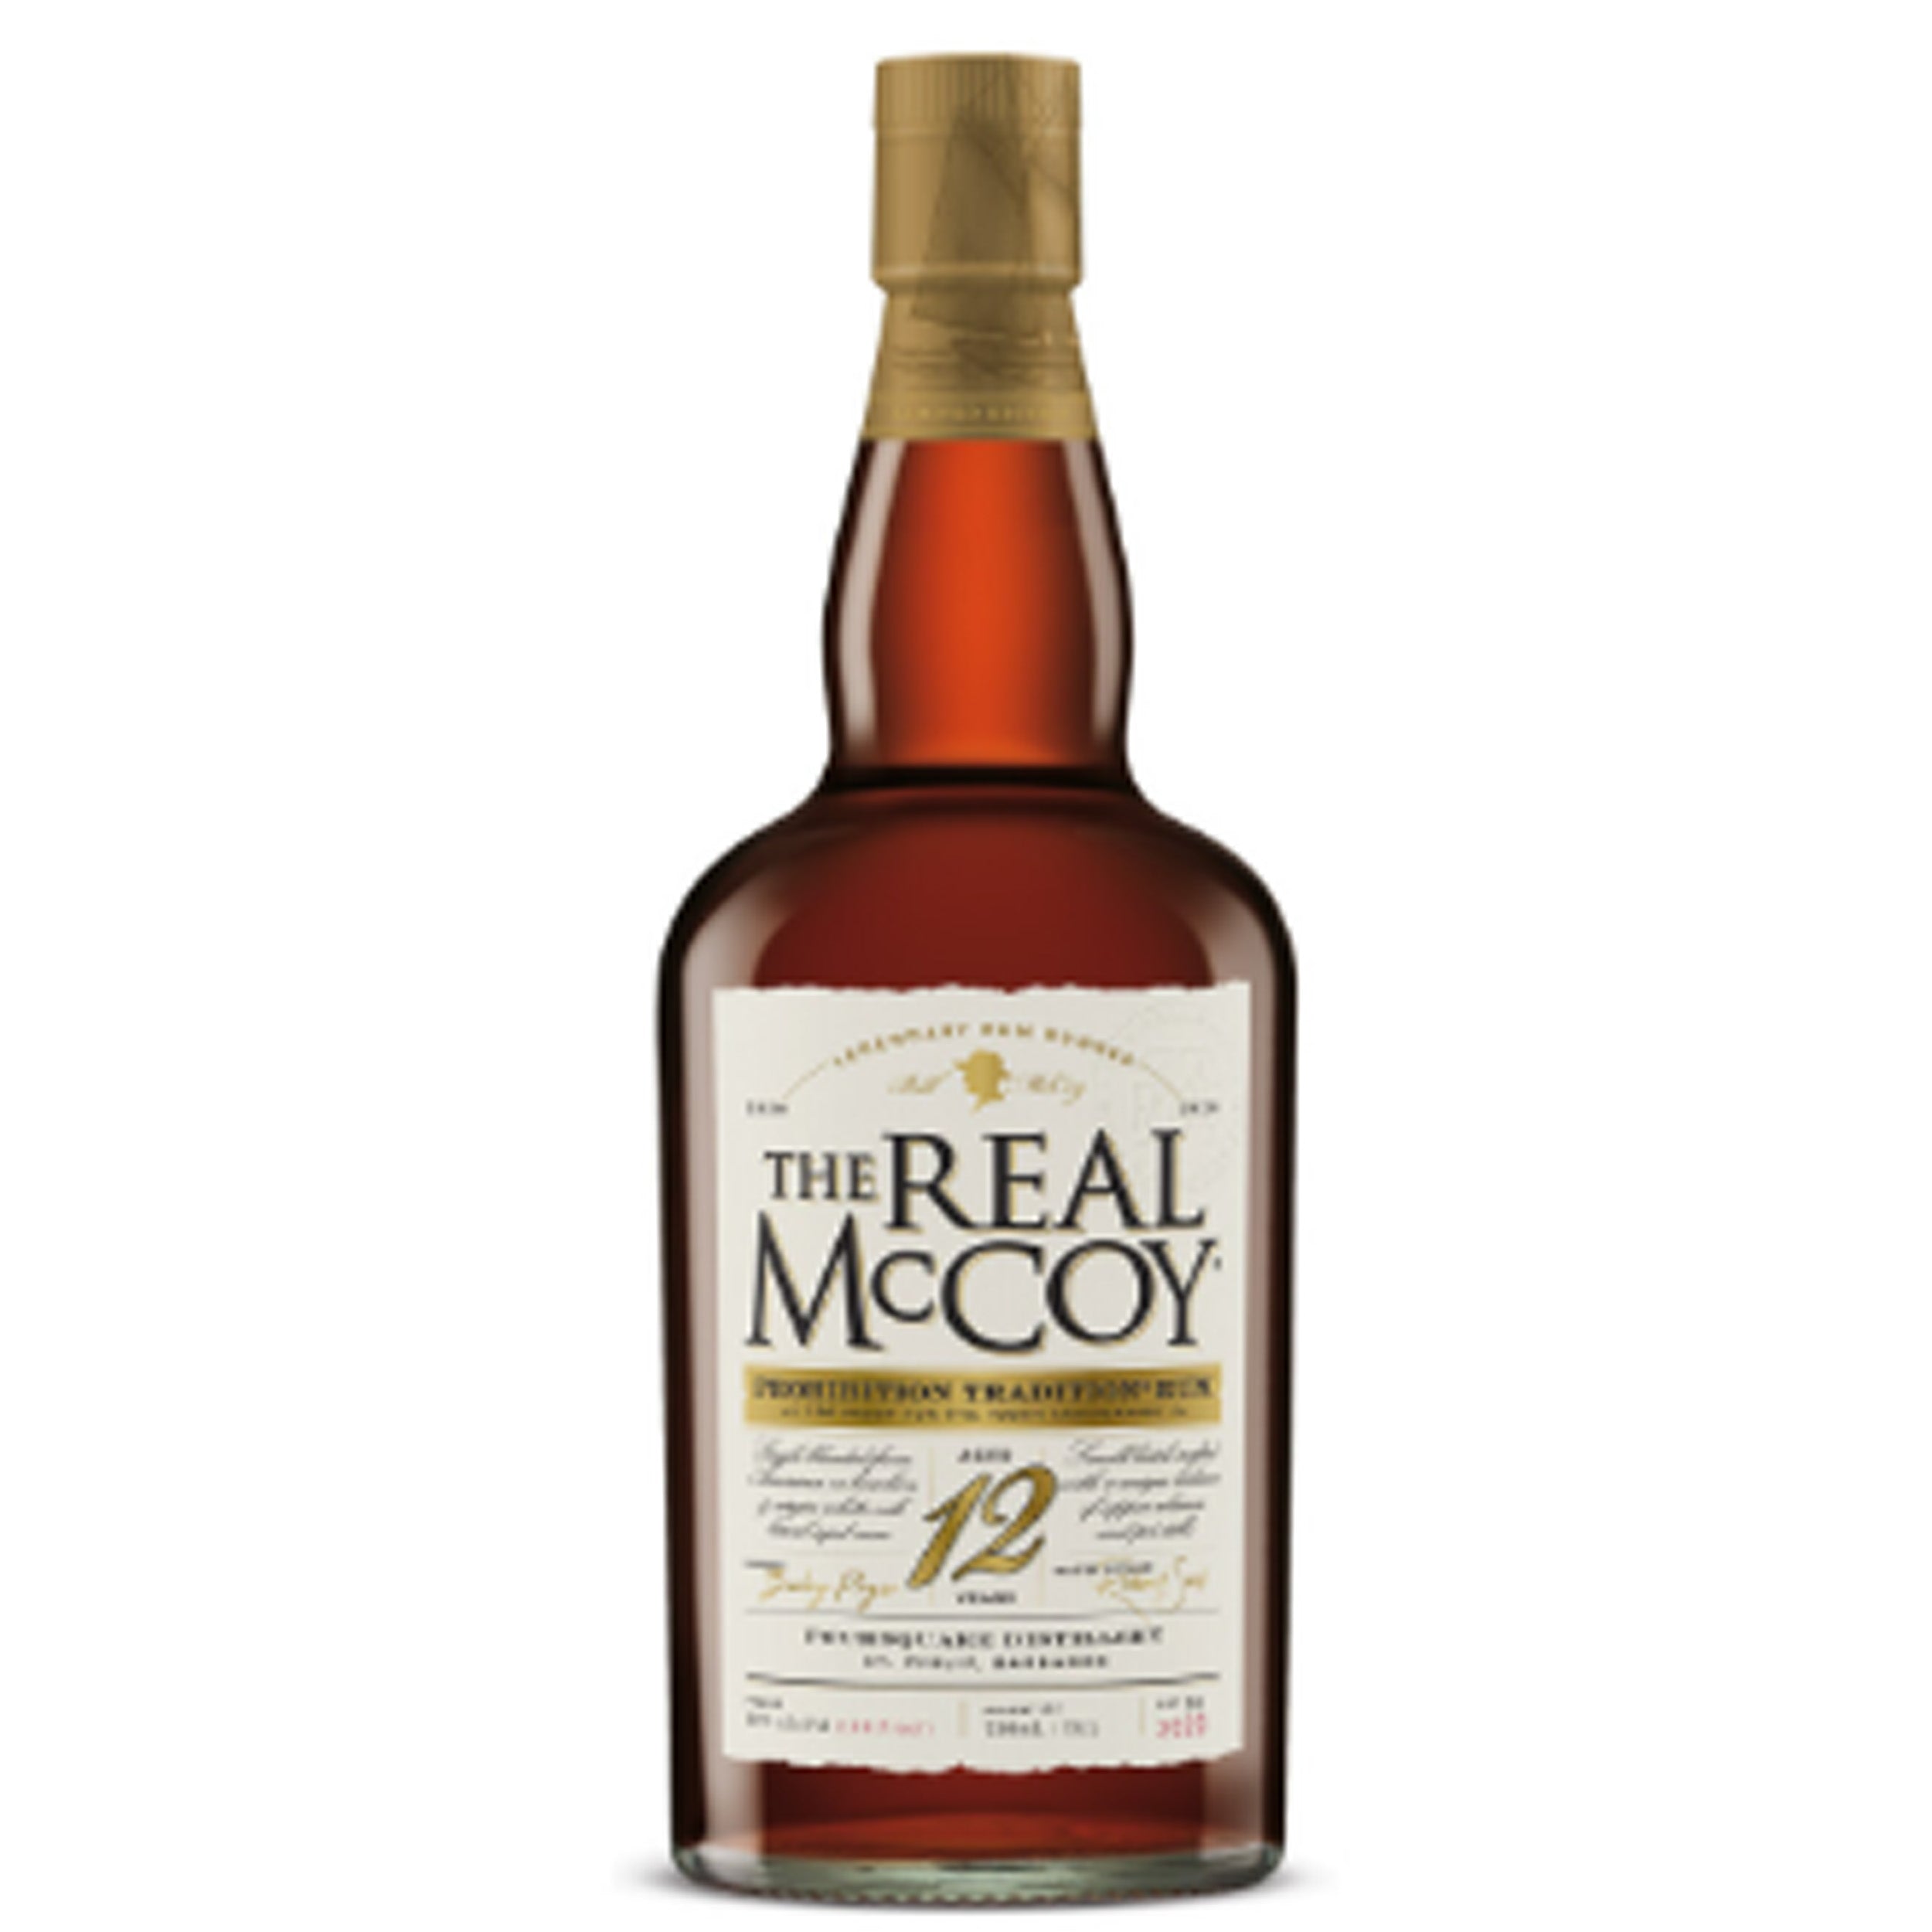 The Real McCoy Prohibition Tradition 12 Year Rum